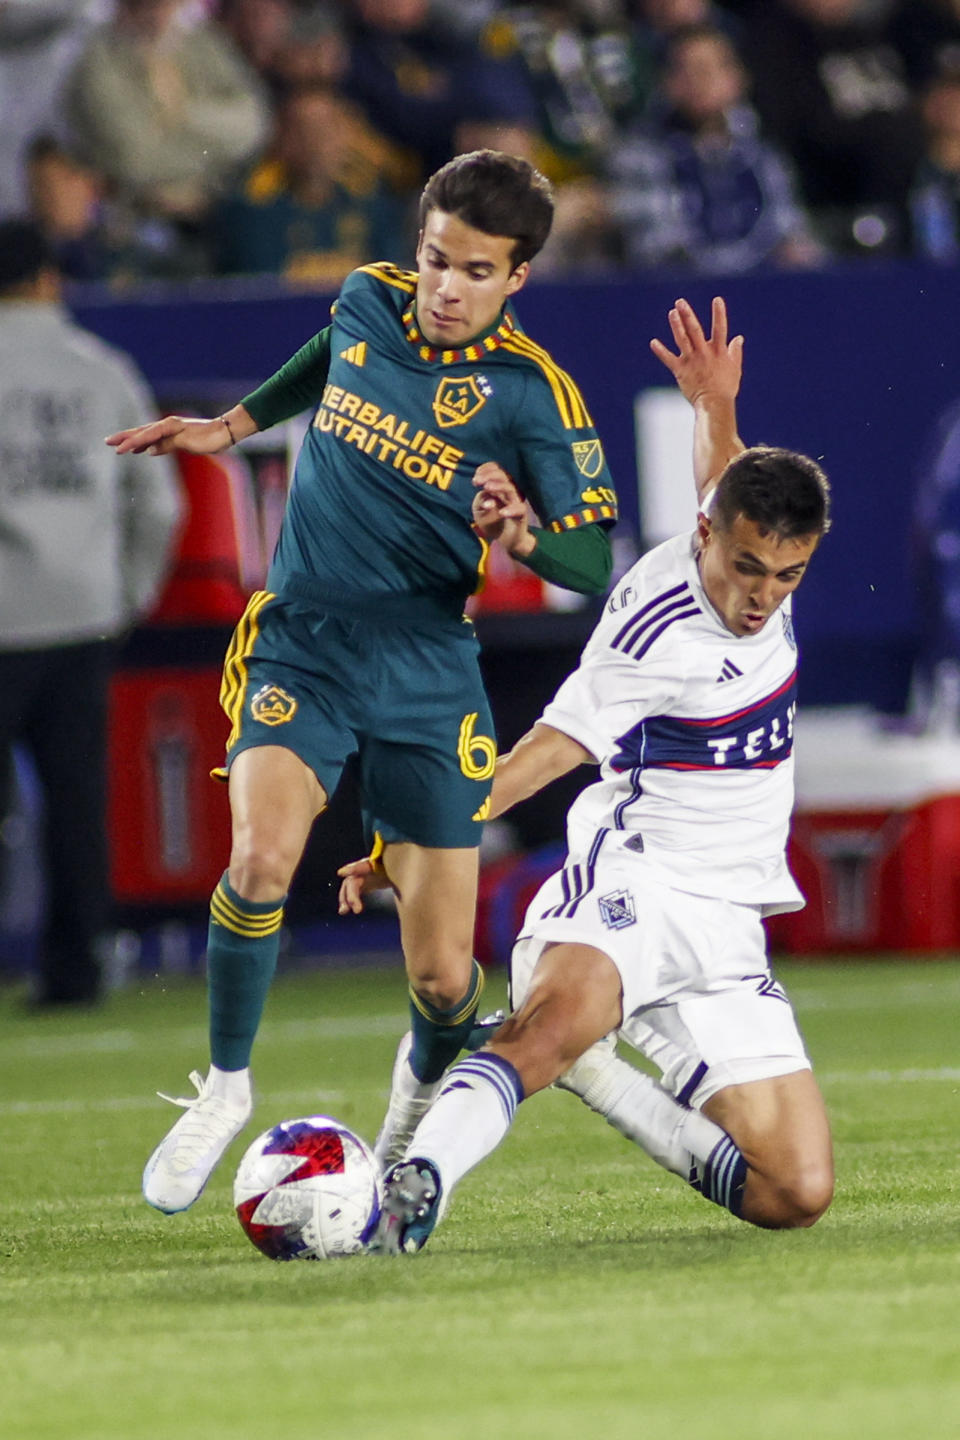 LA Galaxy midfielder Riqui Puig, left, and Vancouver Whitecaps midfielder Andrés Cubas vie for the ball during the second half of an MLS soccer match in Carson, Calif., Saturday, March 18, 2023. (AP Photo/Ringo H.W. Chiu)